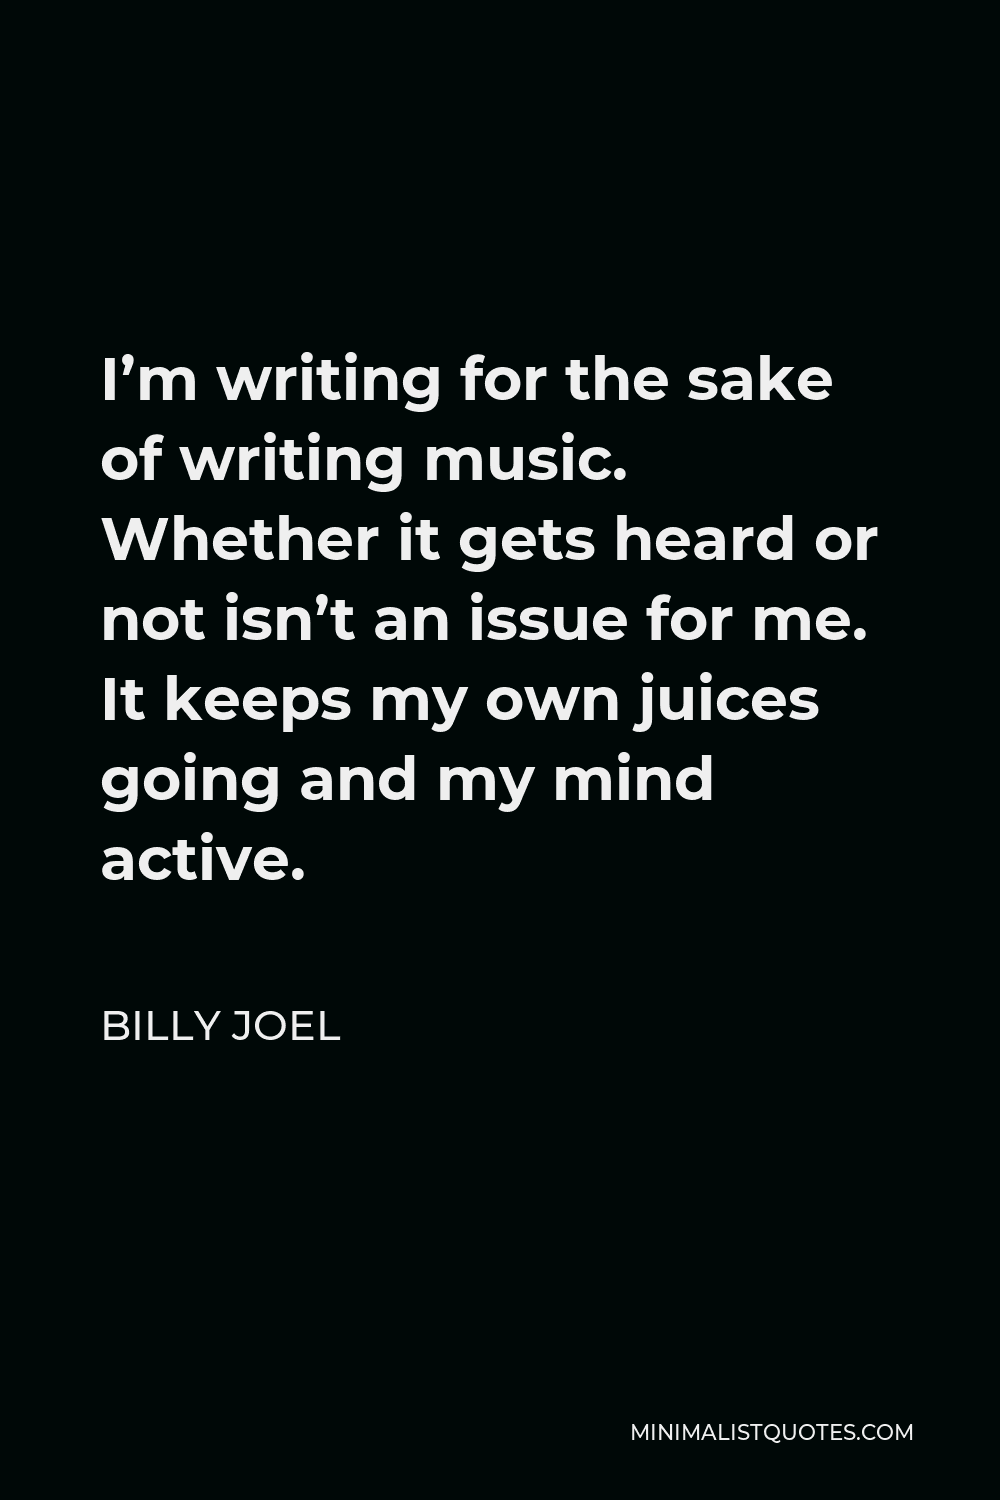 Billy Joel Quote - I’m writing for the sake of writing music. Whether it gets heard or not isn’t an issue for me. It keeps my own juices going and my mind active.